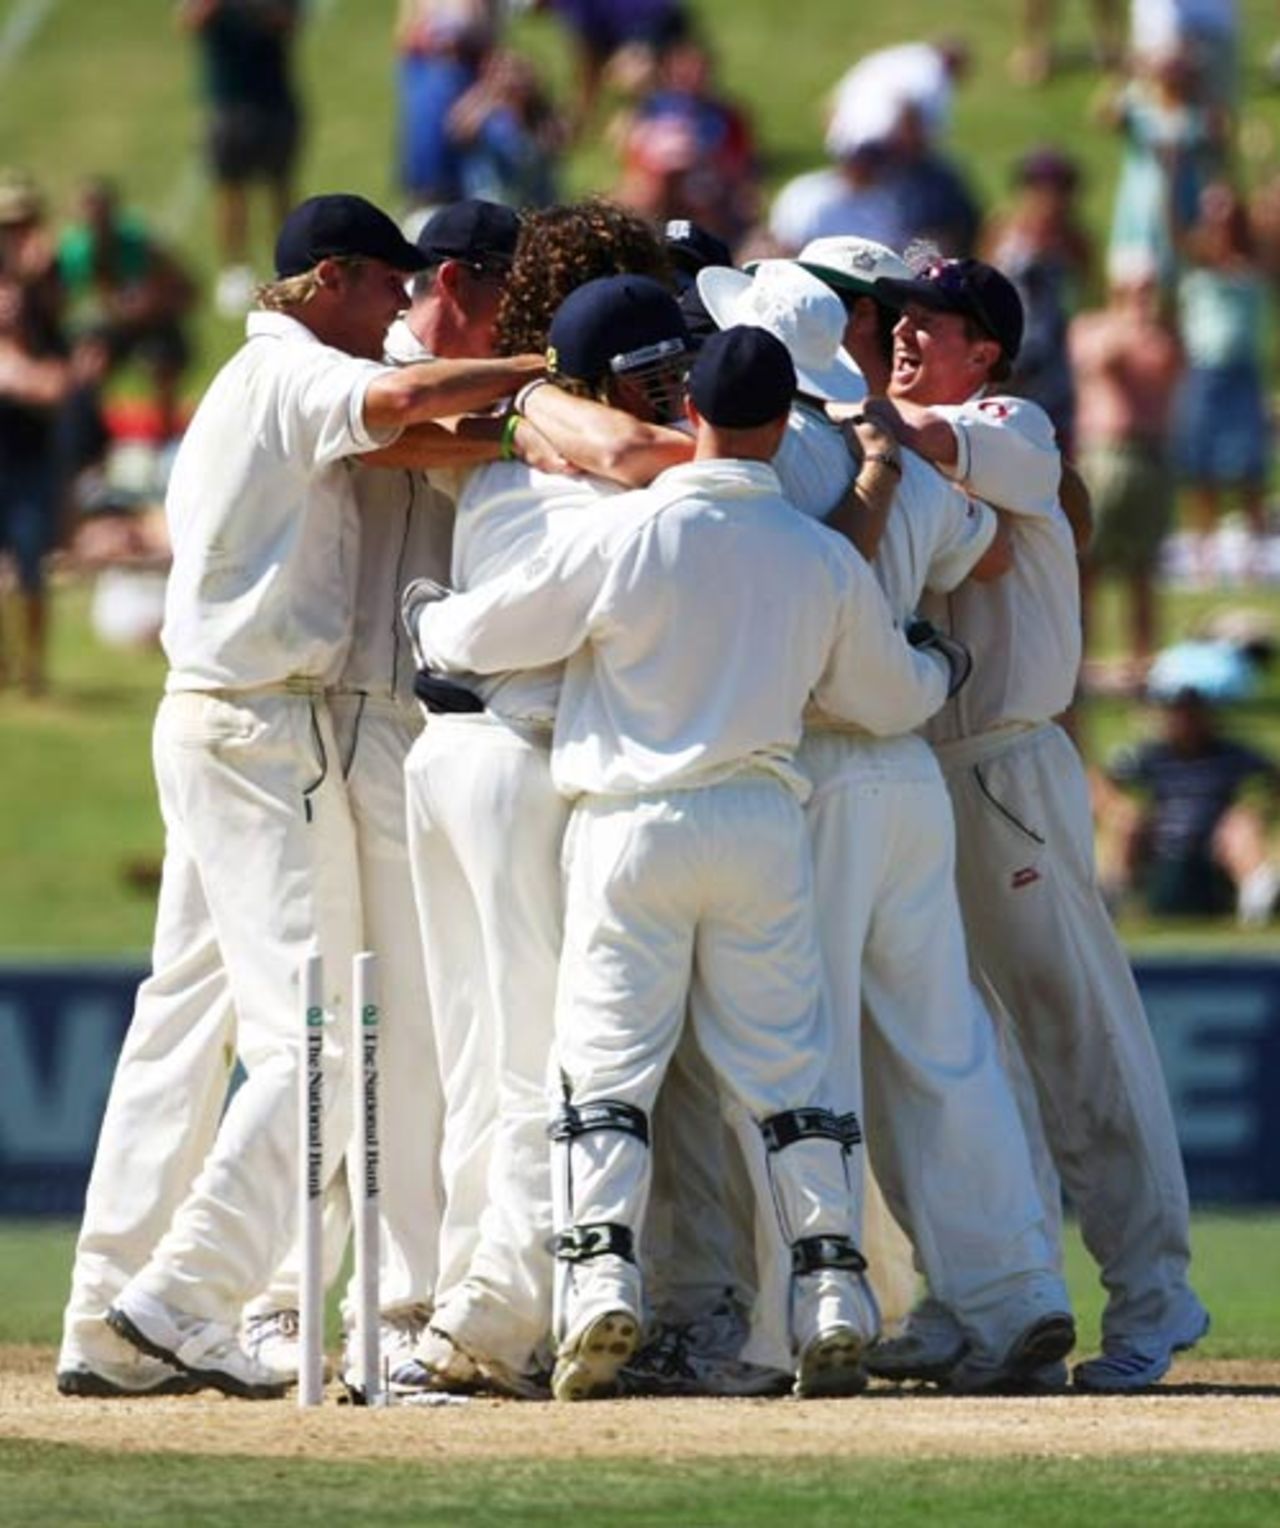 The England team are elated at their come-from-behind series victory, New Zealand v England, 3rd Test, Napier, March 26, 2008